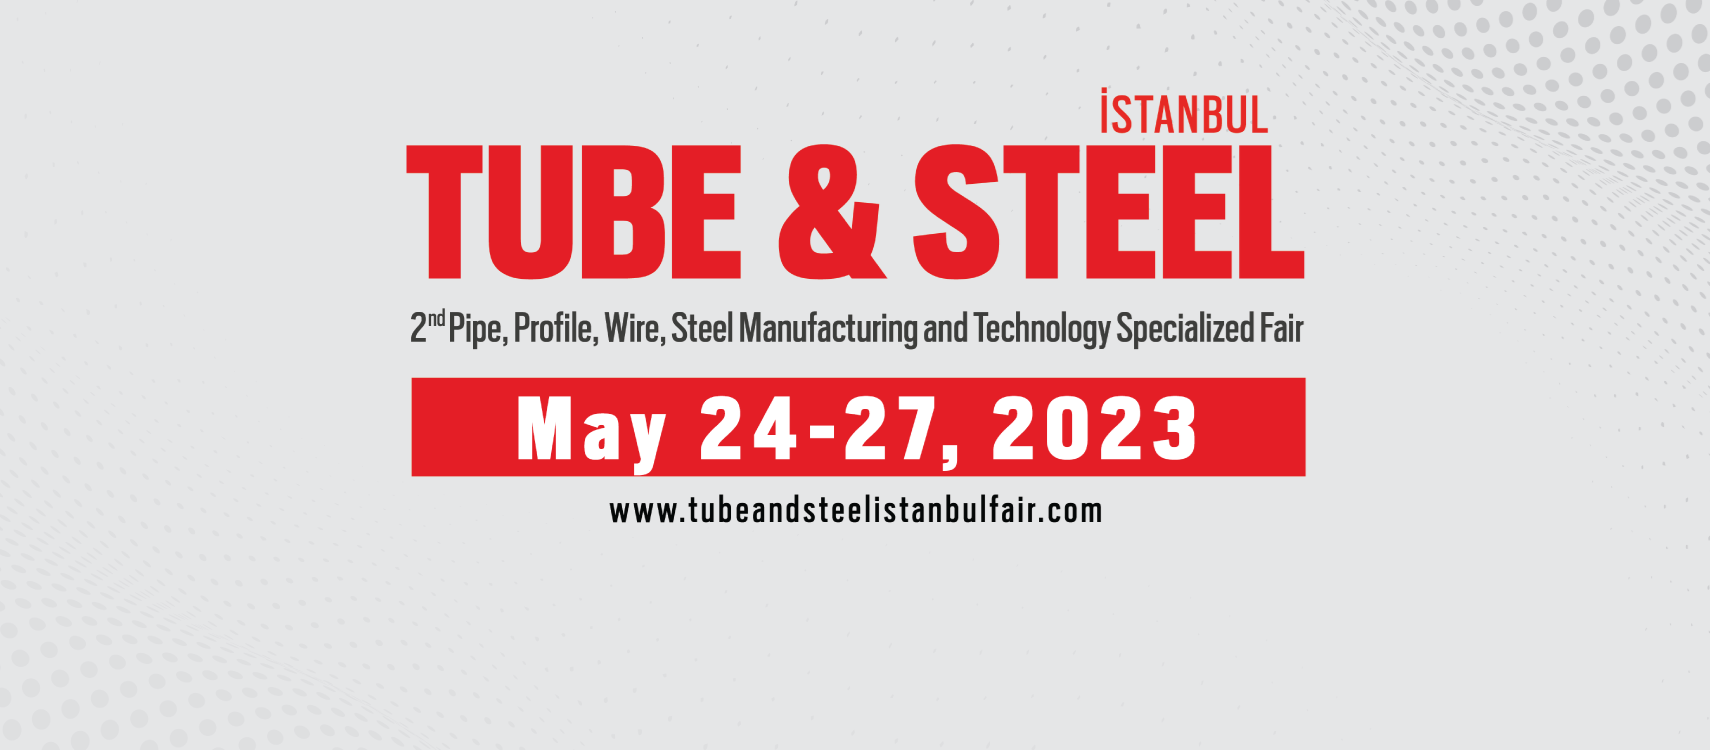 TUBE & STEEL Fair will be at TUYAP Istanbul in May 2023!